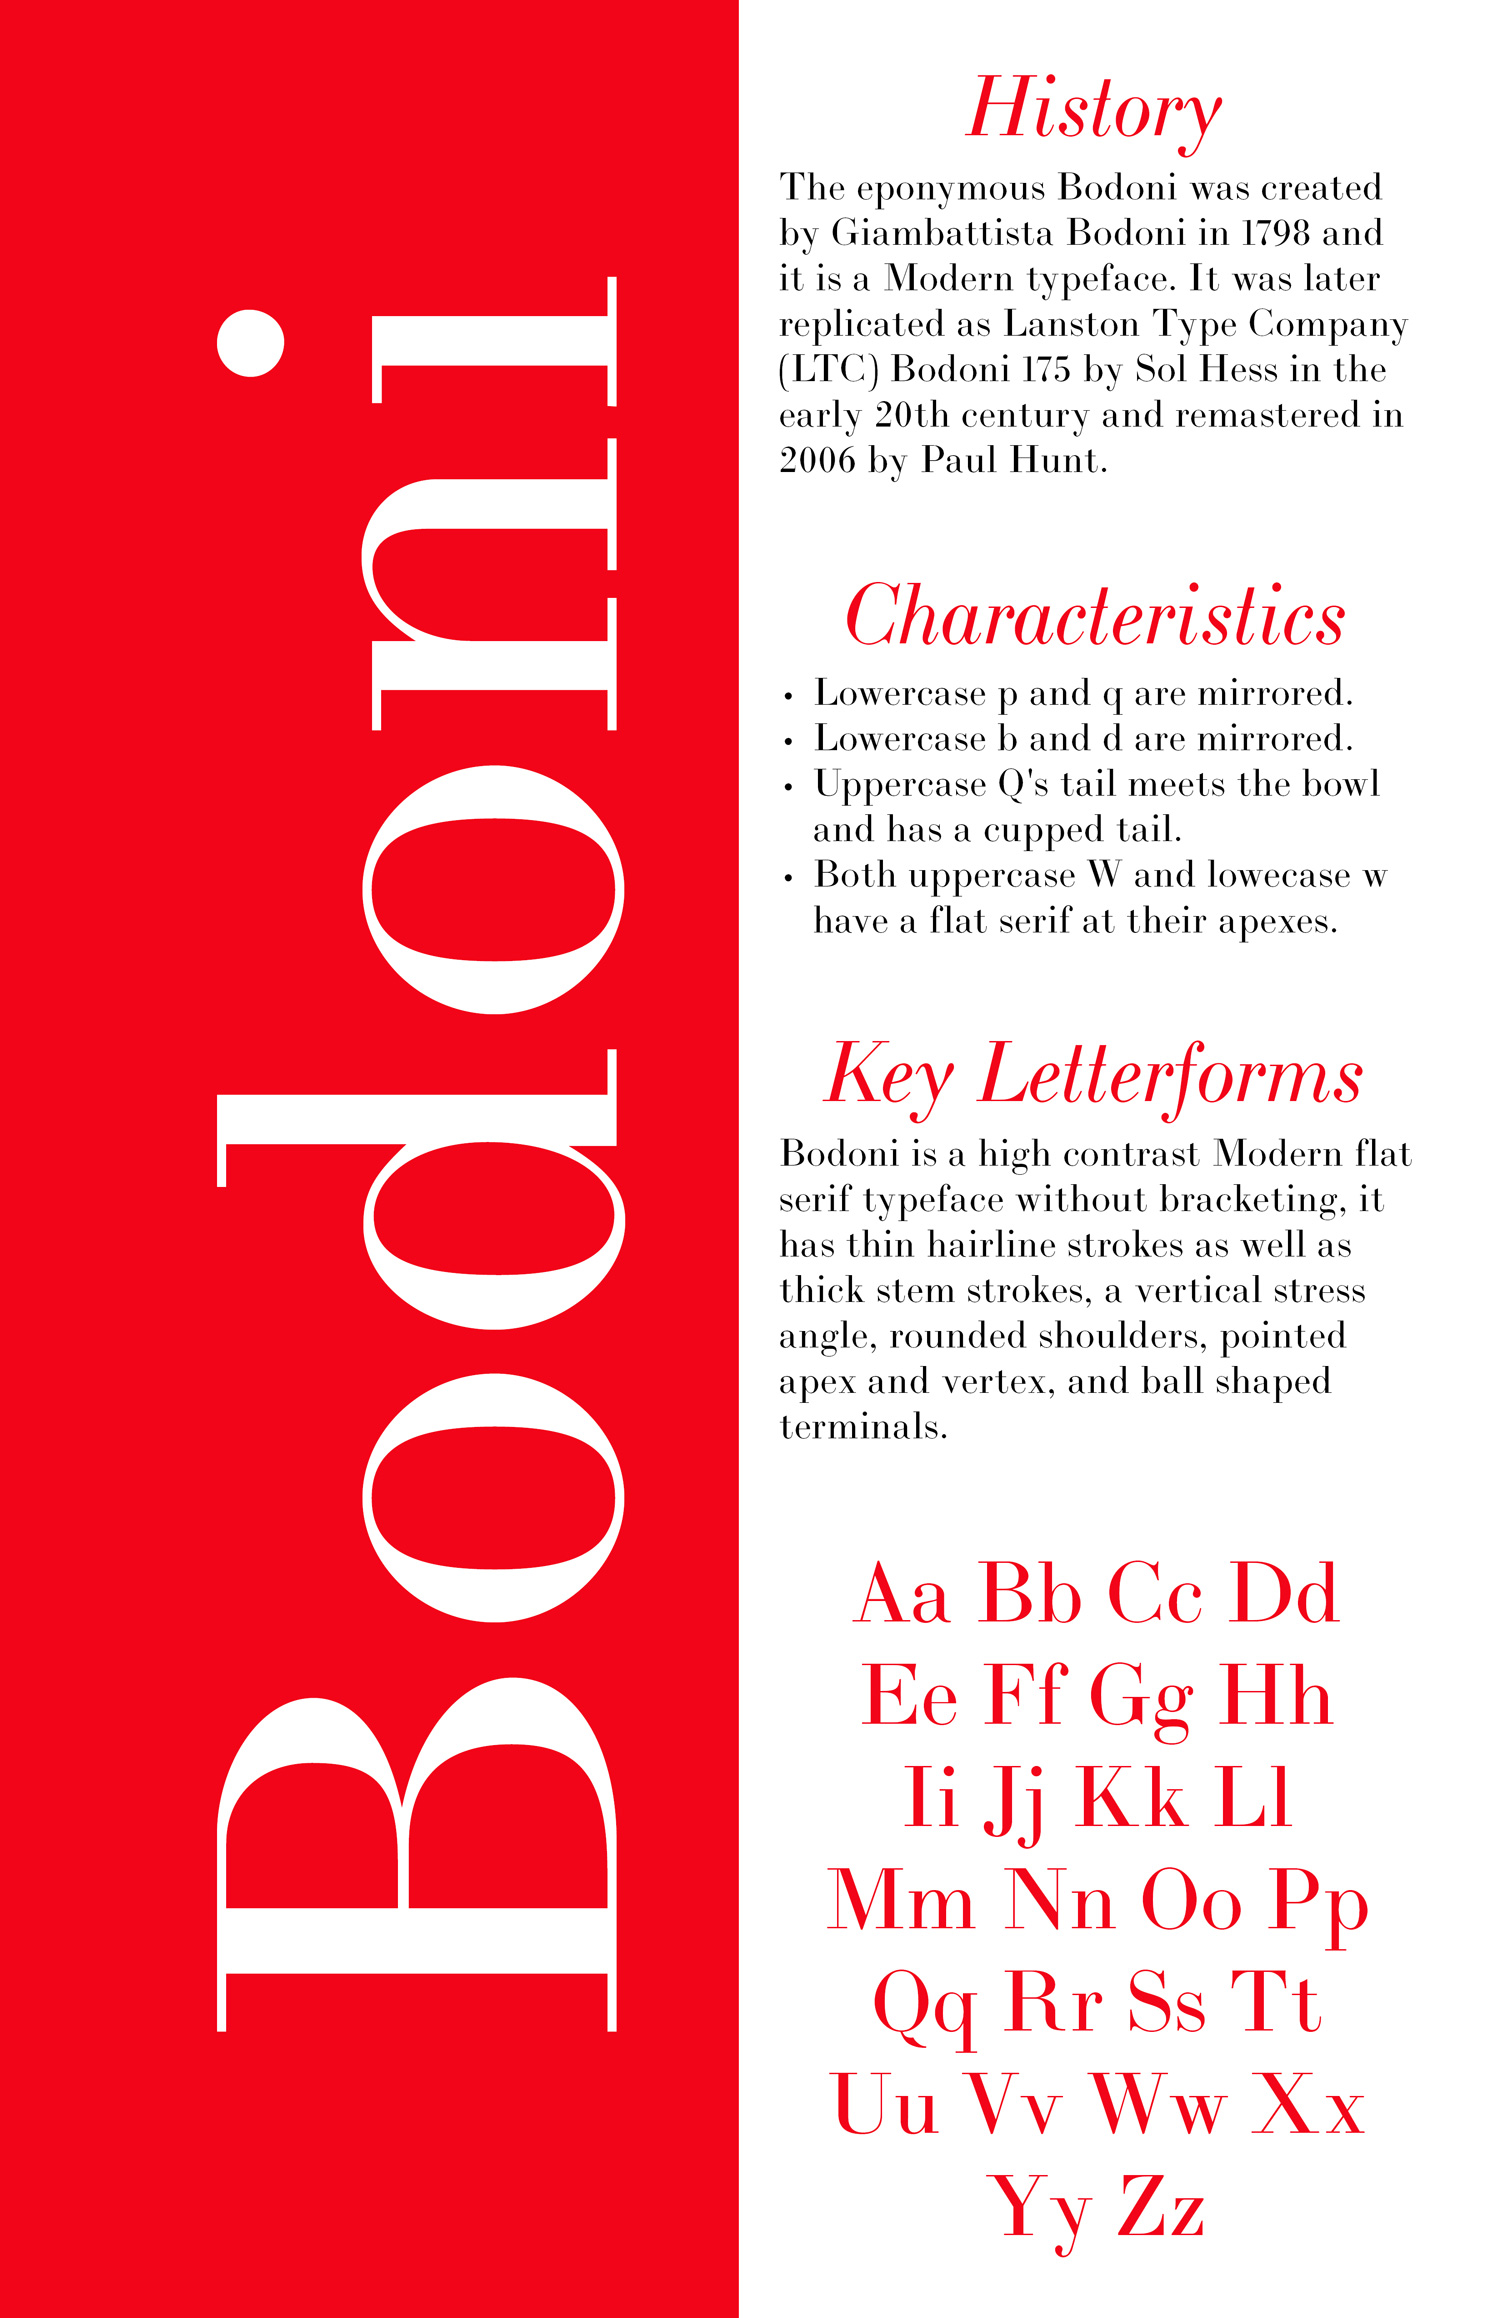 Poster with information on the Bodoni typeface